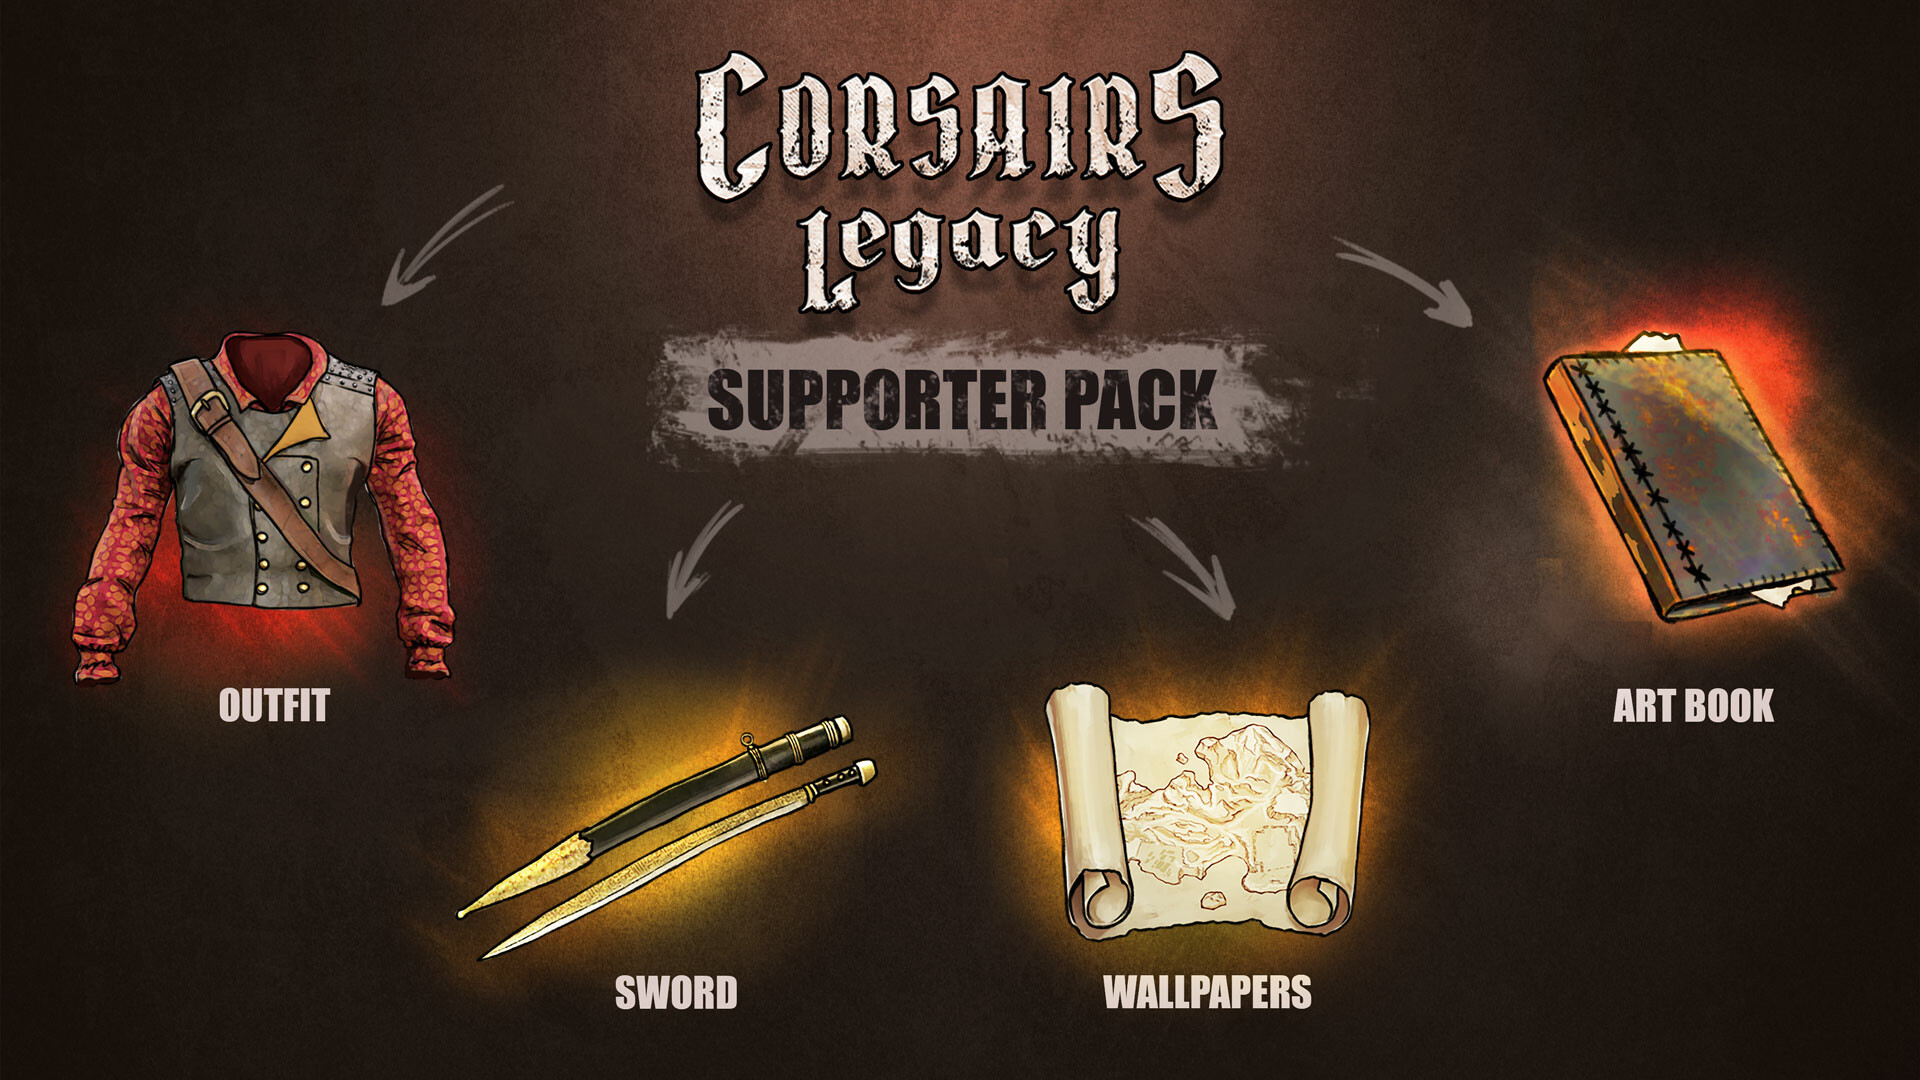 Corsairs Legacy Supporter Pack Featured Screenshot #1